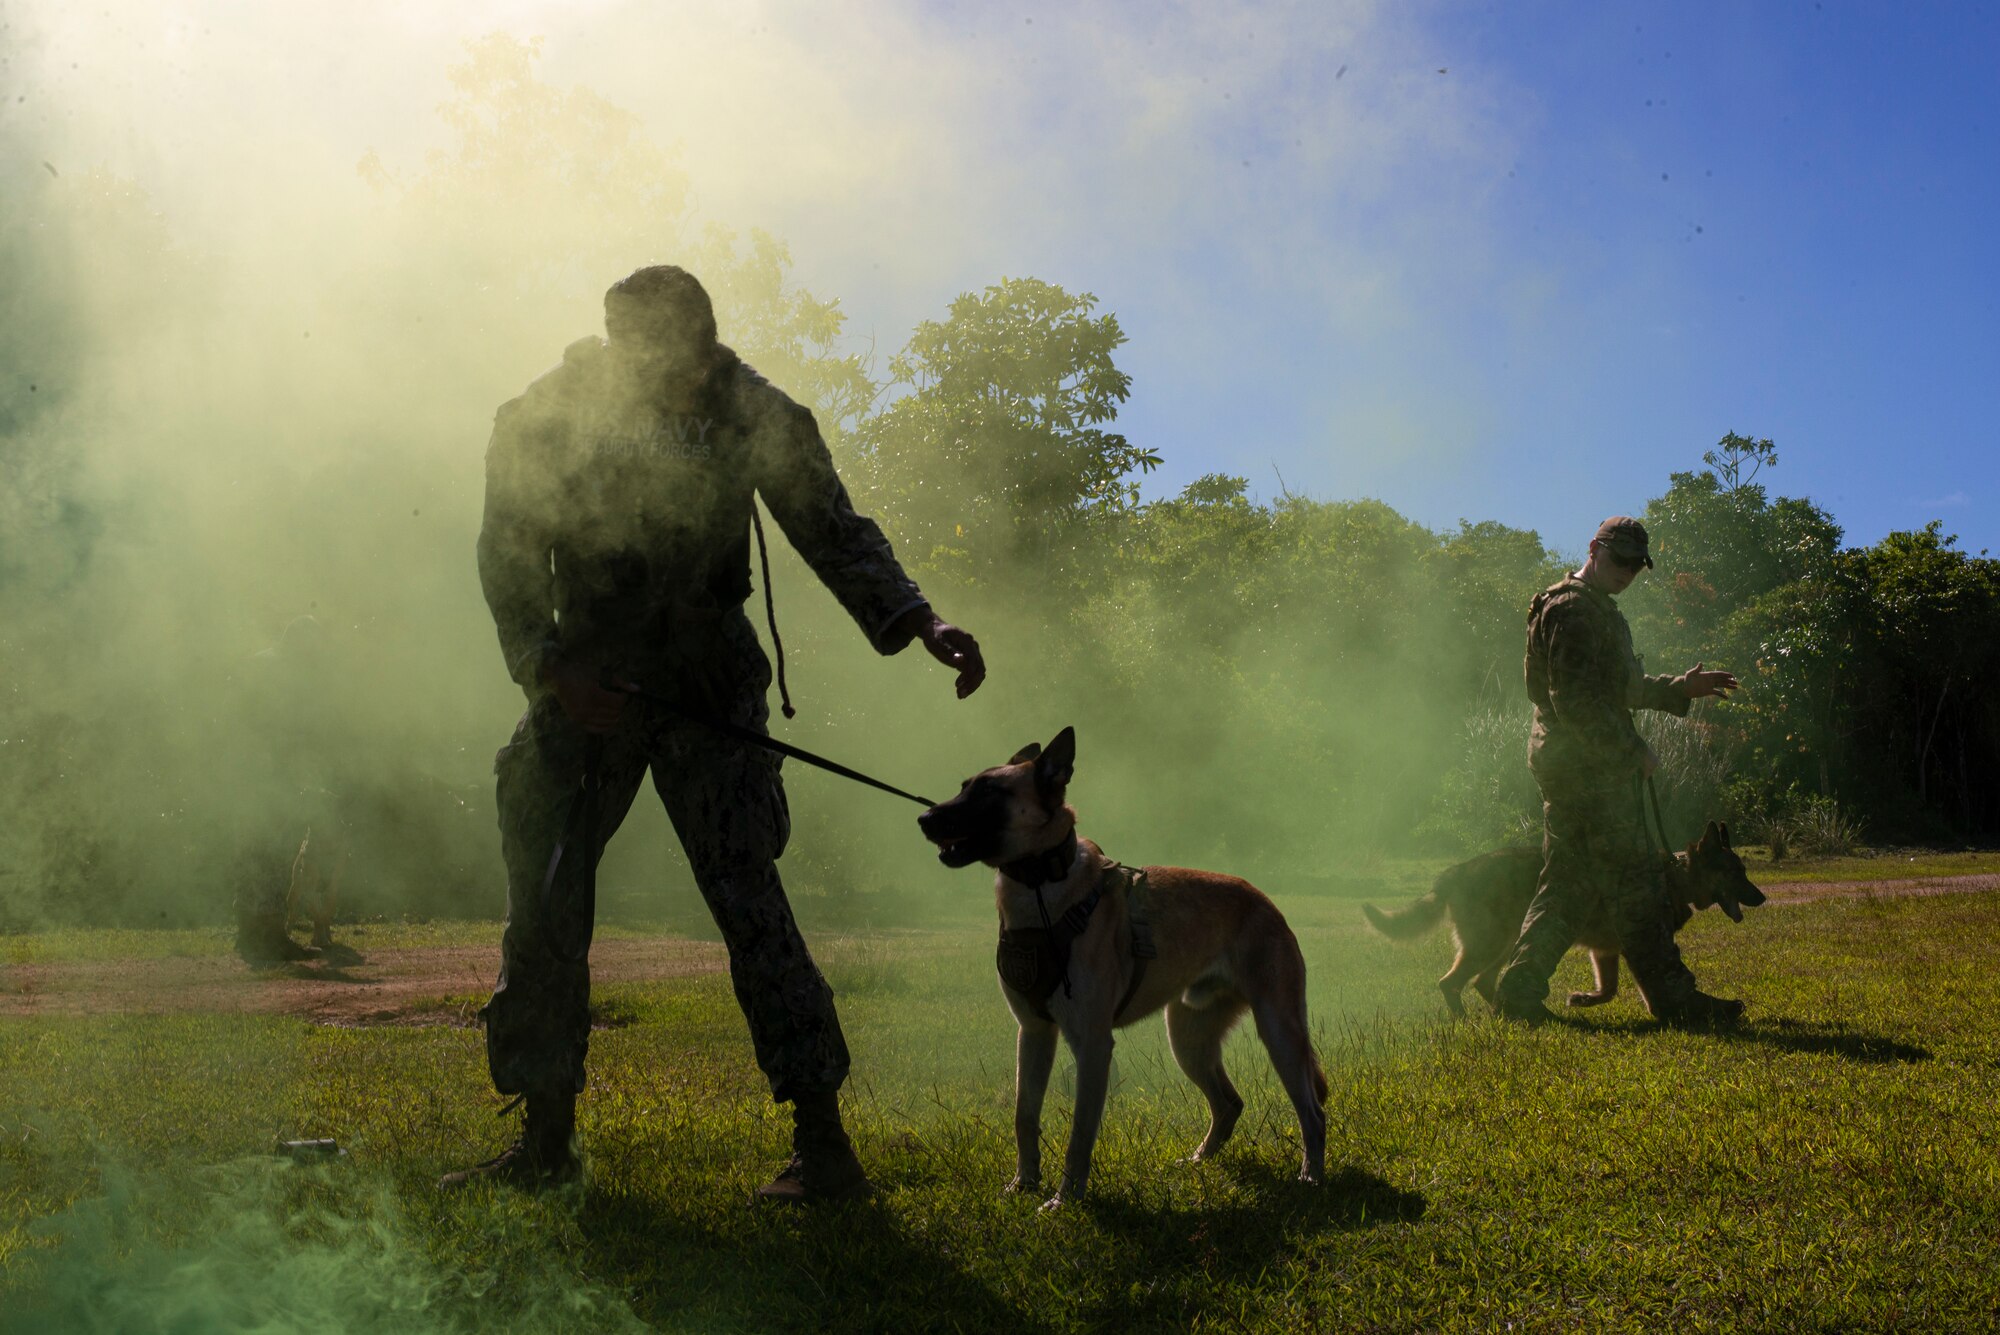 Petty Officer 2nd Class Adrian Rodriguez, U.S. Naval Base Guam K-9 Unit, guides Roni through smoke to get him used to the sights and smells of combat on Andersen Air Force Base, Guam Nov. 20. Marines and Airmen exchanged MWD techiques to enhance joint mission effectivness. (U.S. Air Force photo by Staff Sgt. Nicholas Crisp)